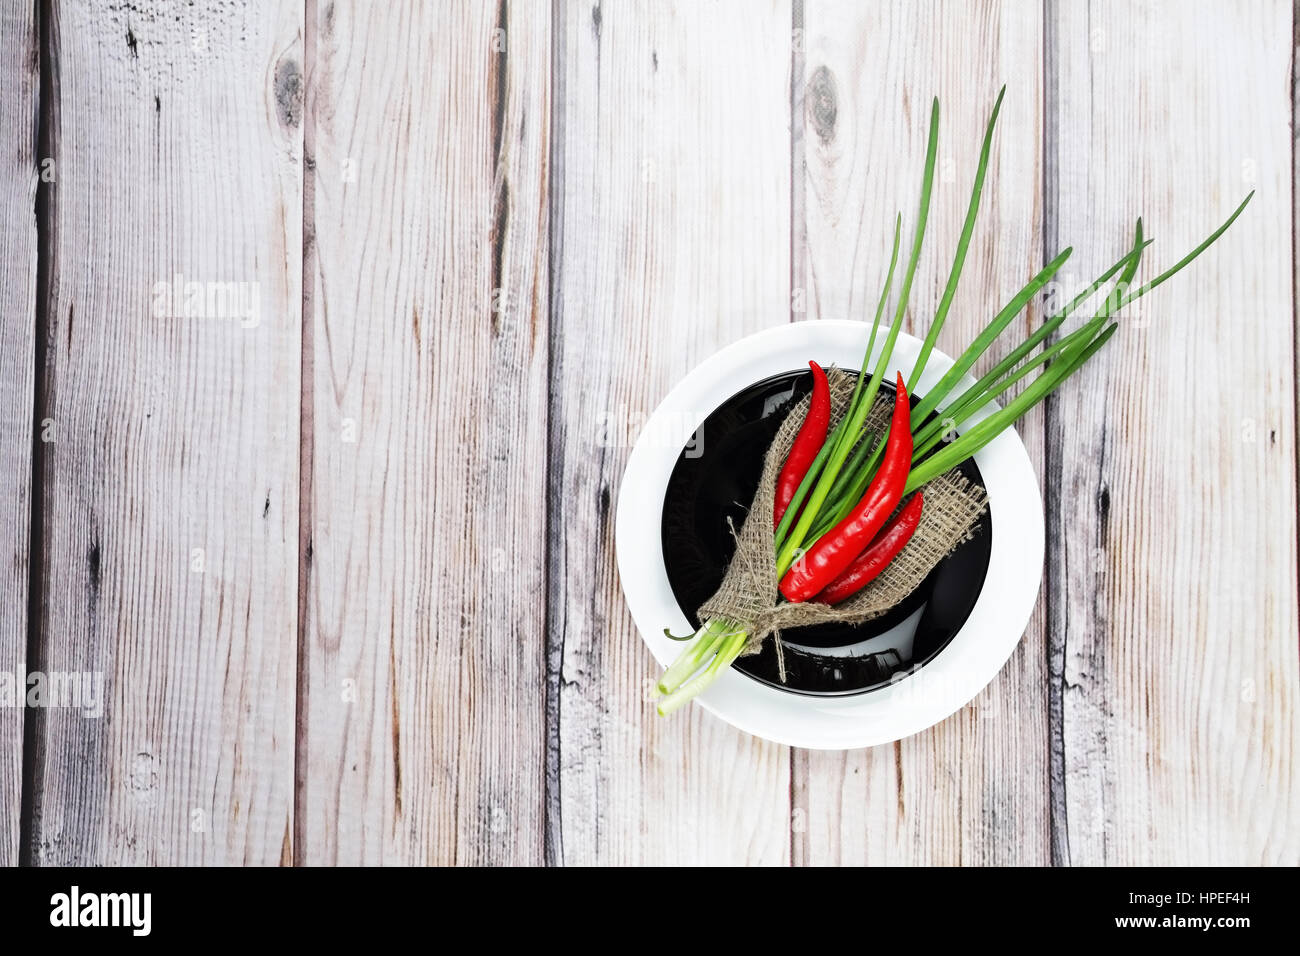 Red hot chilli pepper and scallions on black plate wooden background Stock Photo